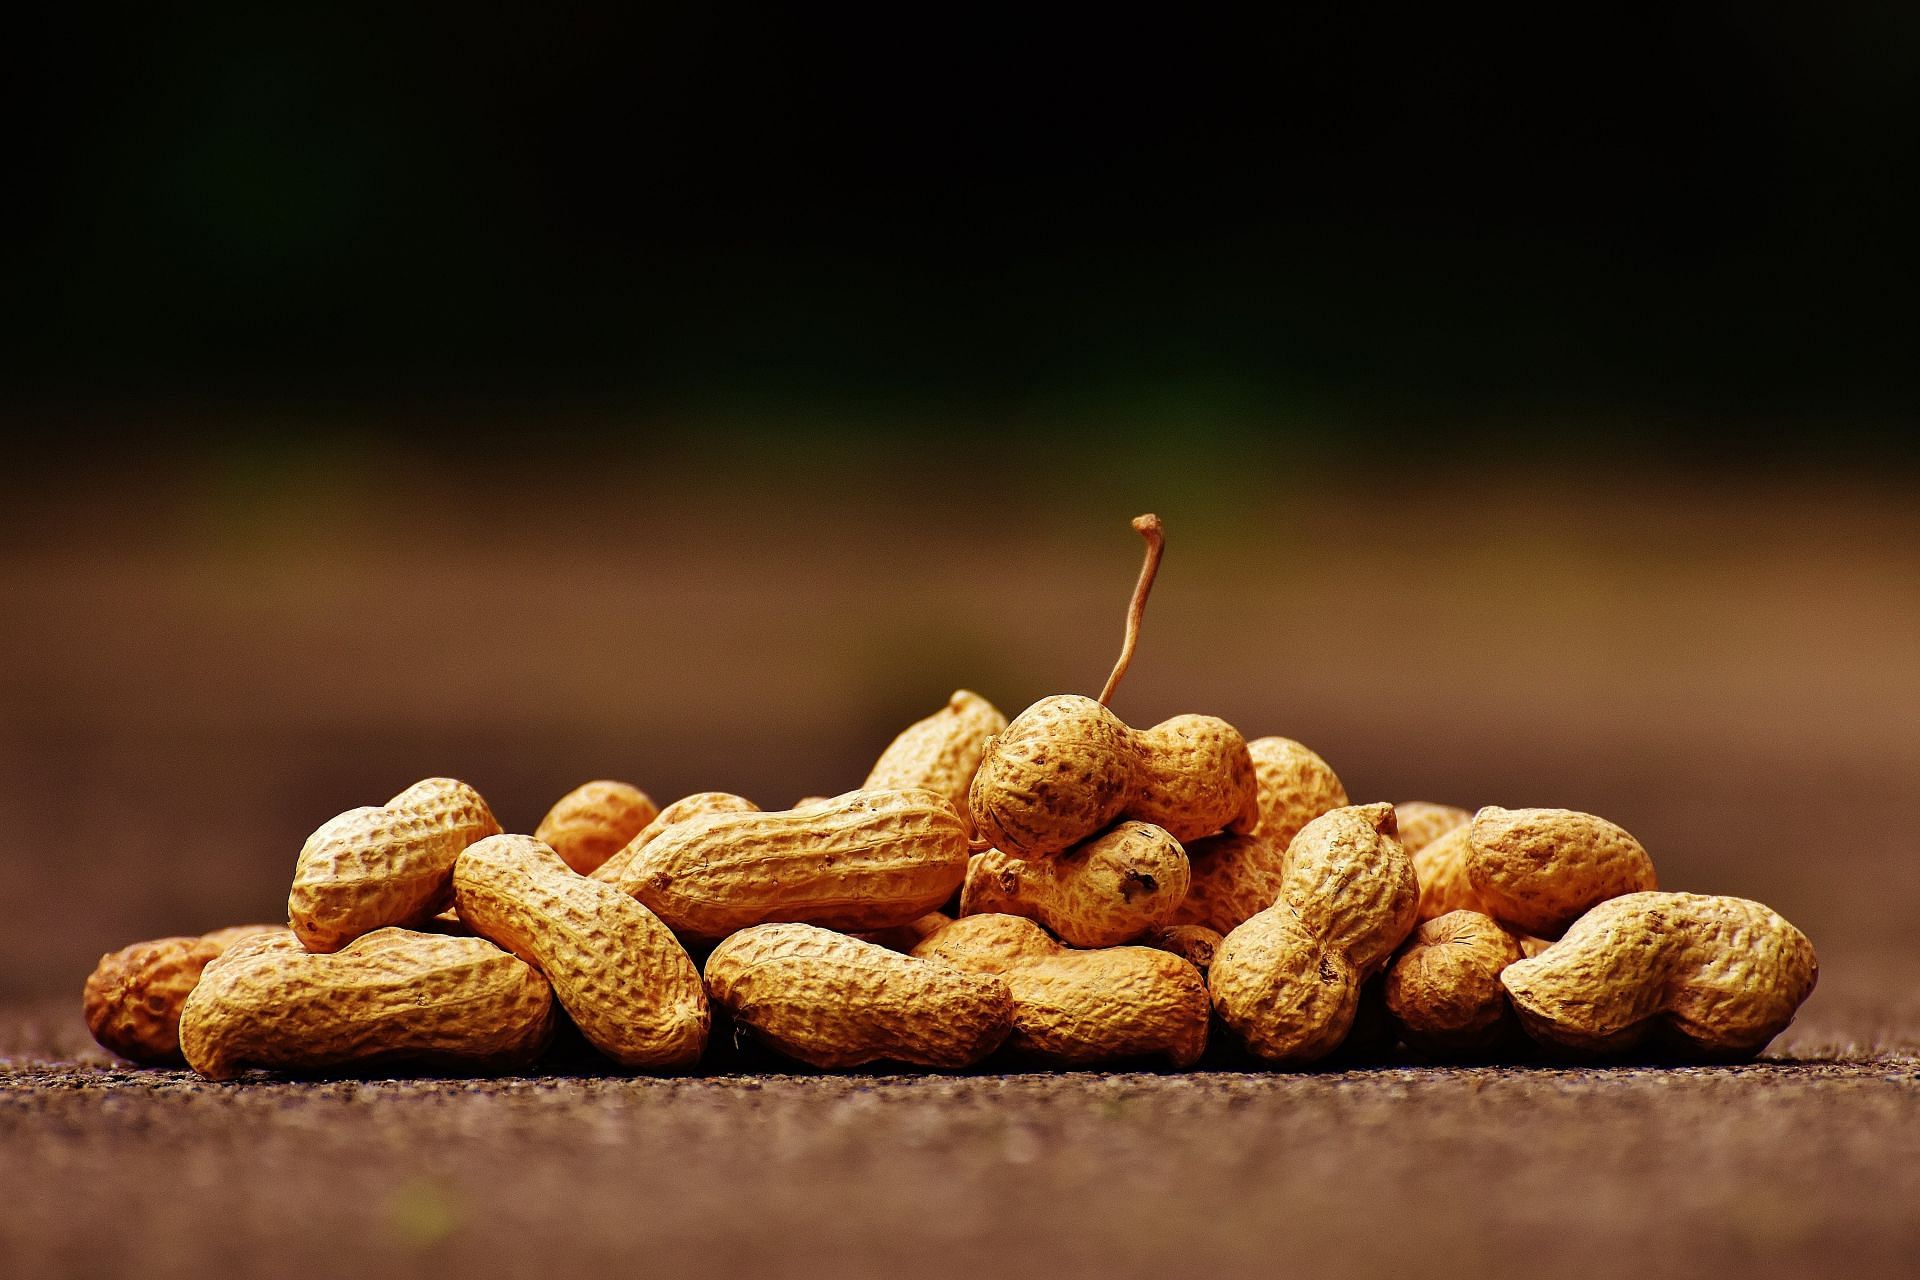 Importance of benefits of peanuts (image sourced via Pexels / Photo by pixabay)